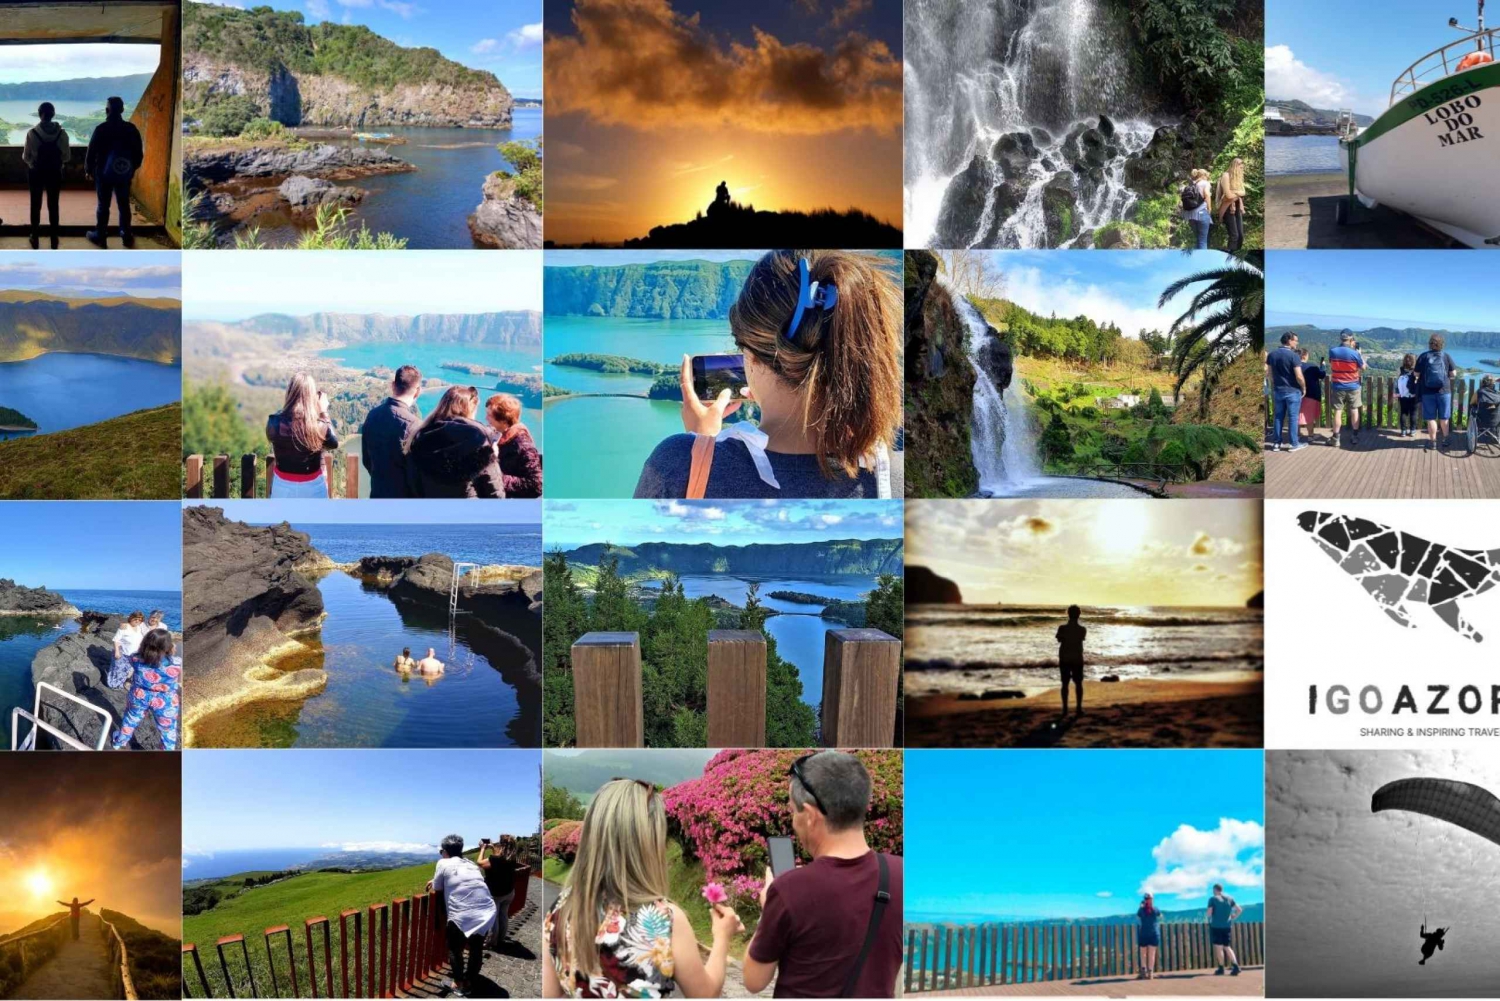 São Miguel: 2-Day Sightseeing Tour Including Lunches